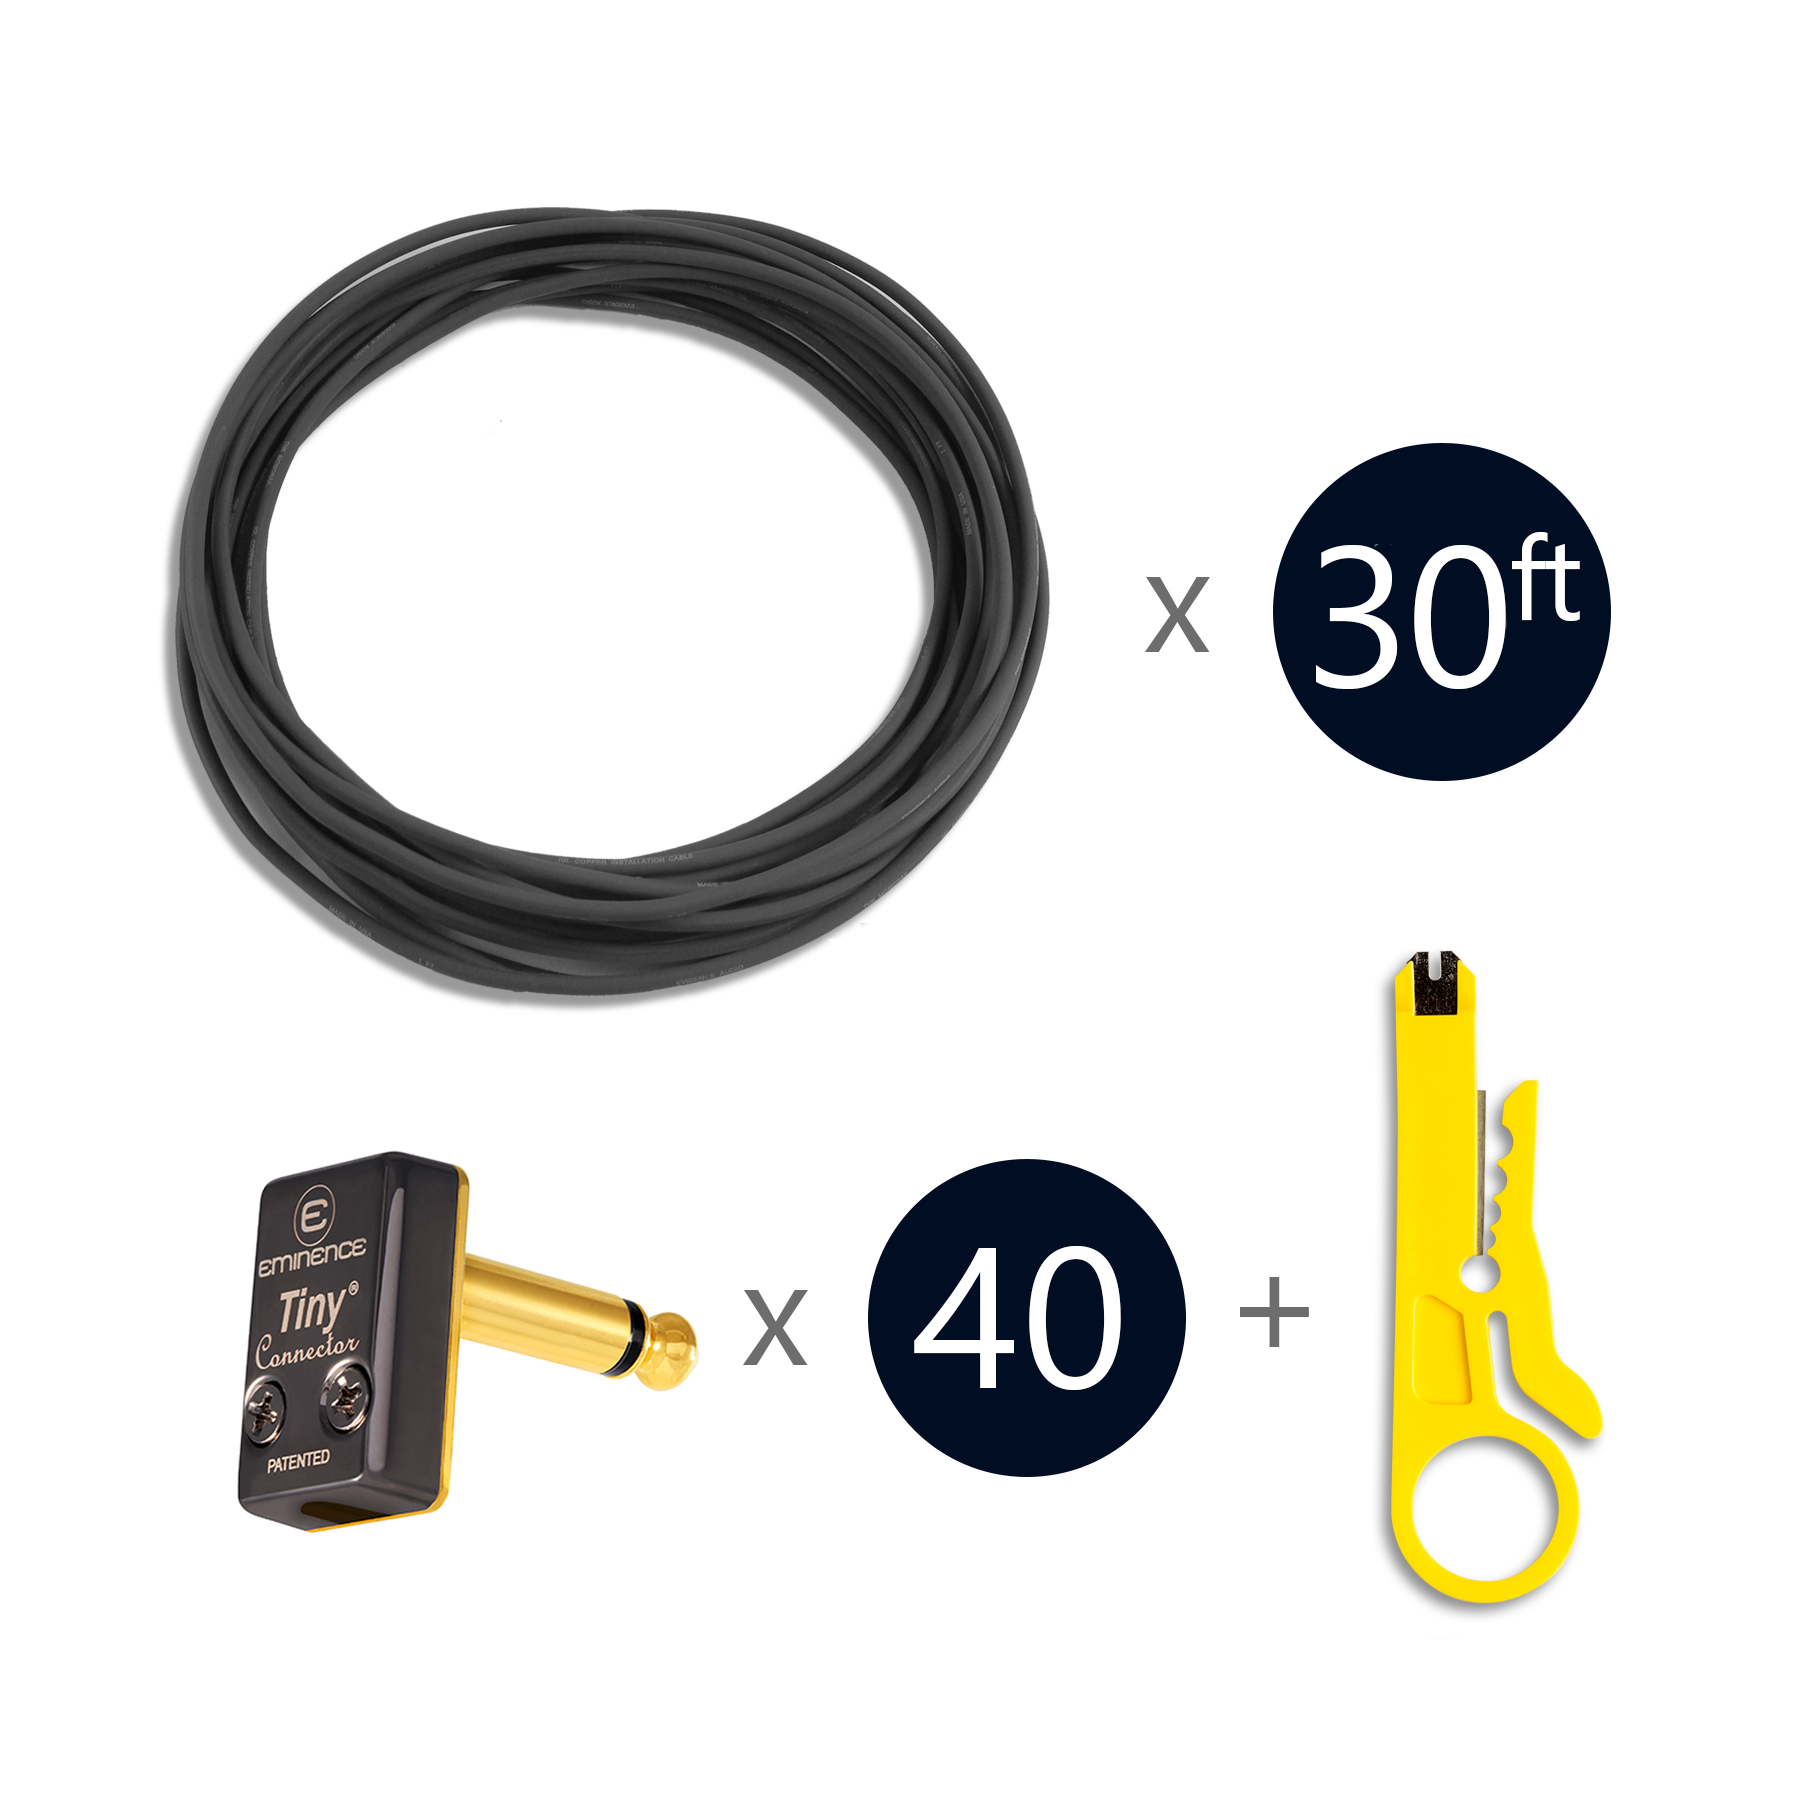 30 ft Evidence Audio Monorail cable + 40 x Eminence Tiny Connector Plug + cable cutter tool